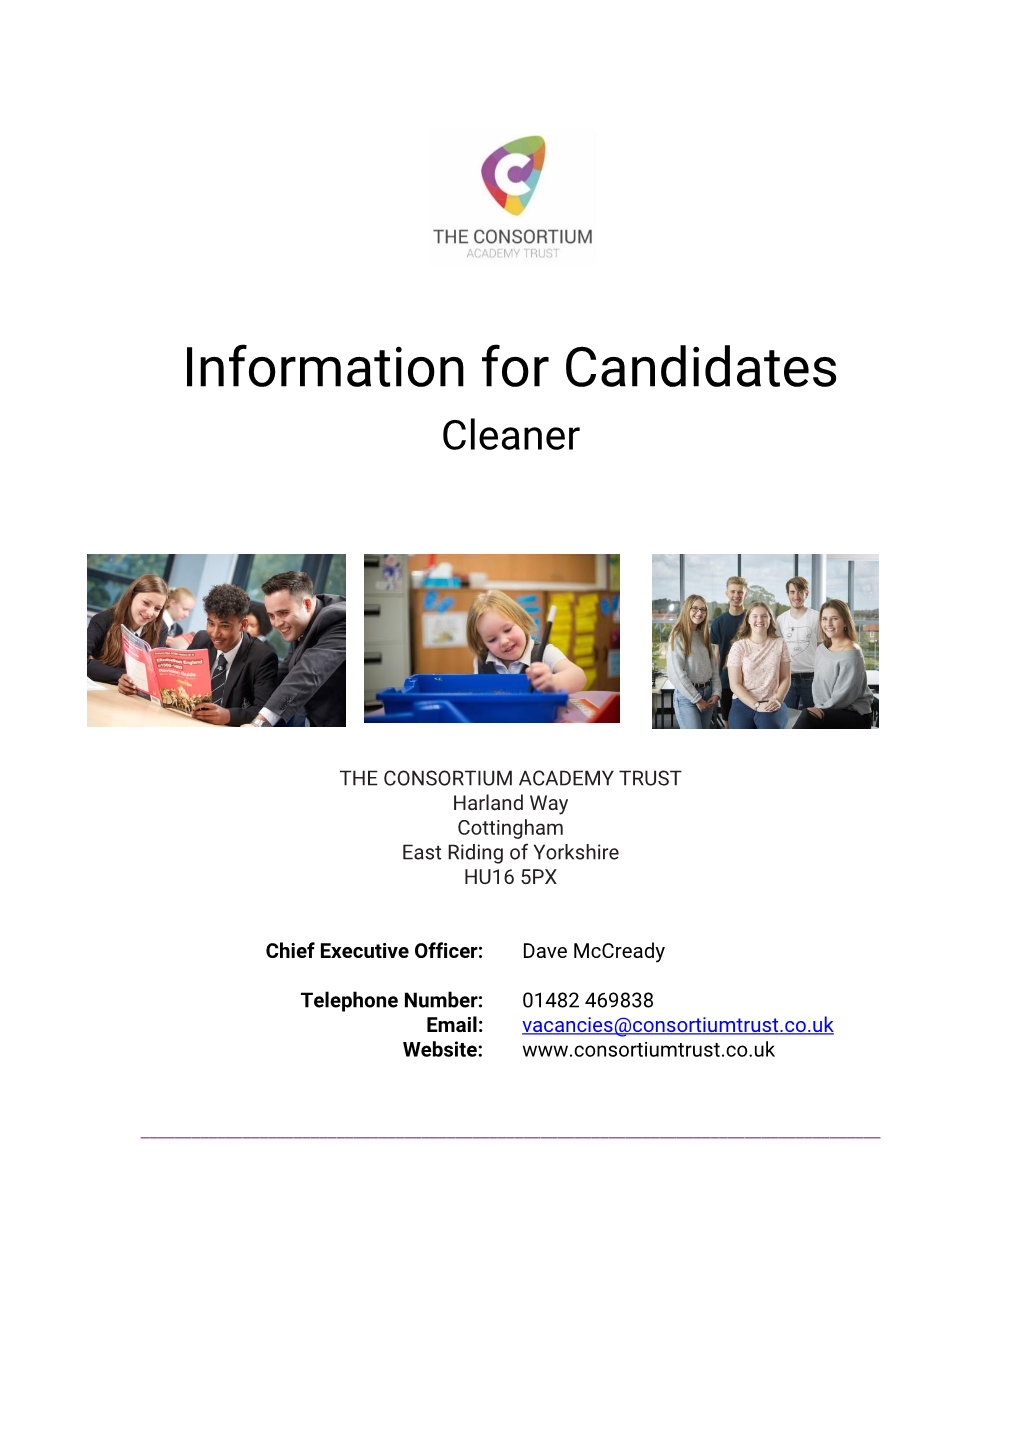 Information for Candidates Cleaner